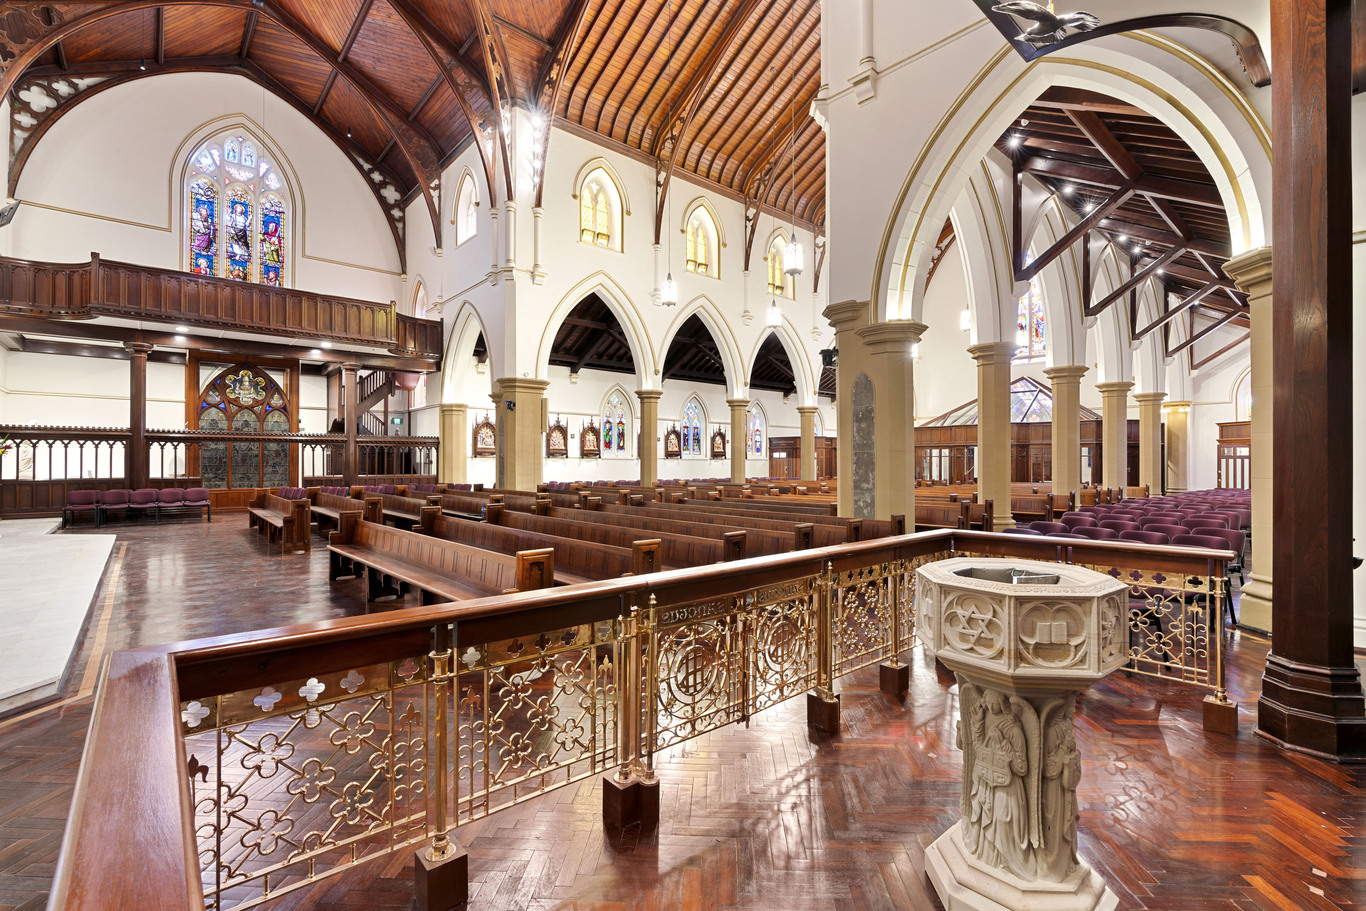 St Peter & St Pauls Old Cathedral (internal works), Goulburn